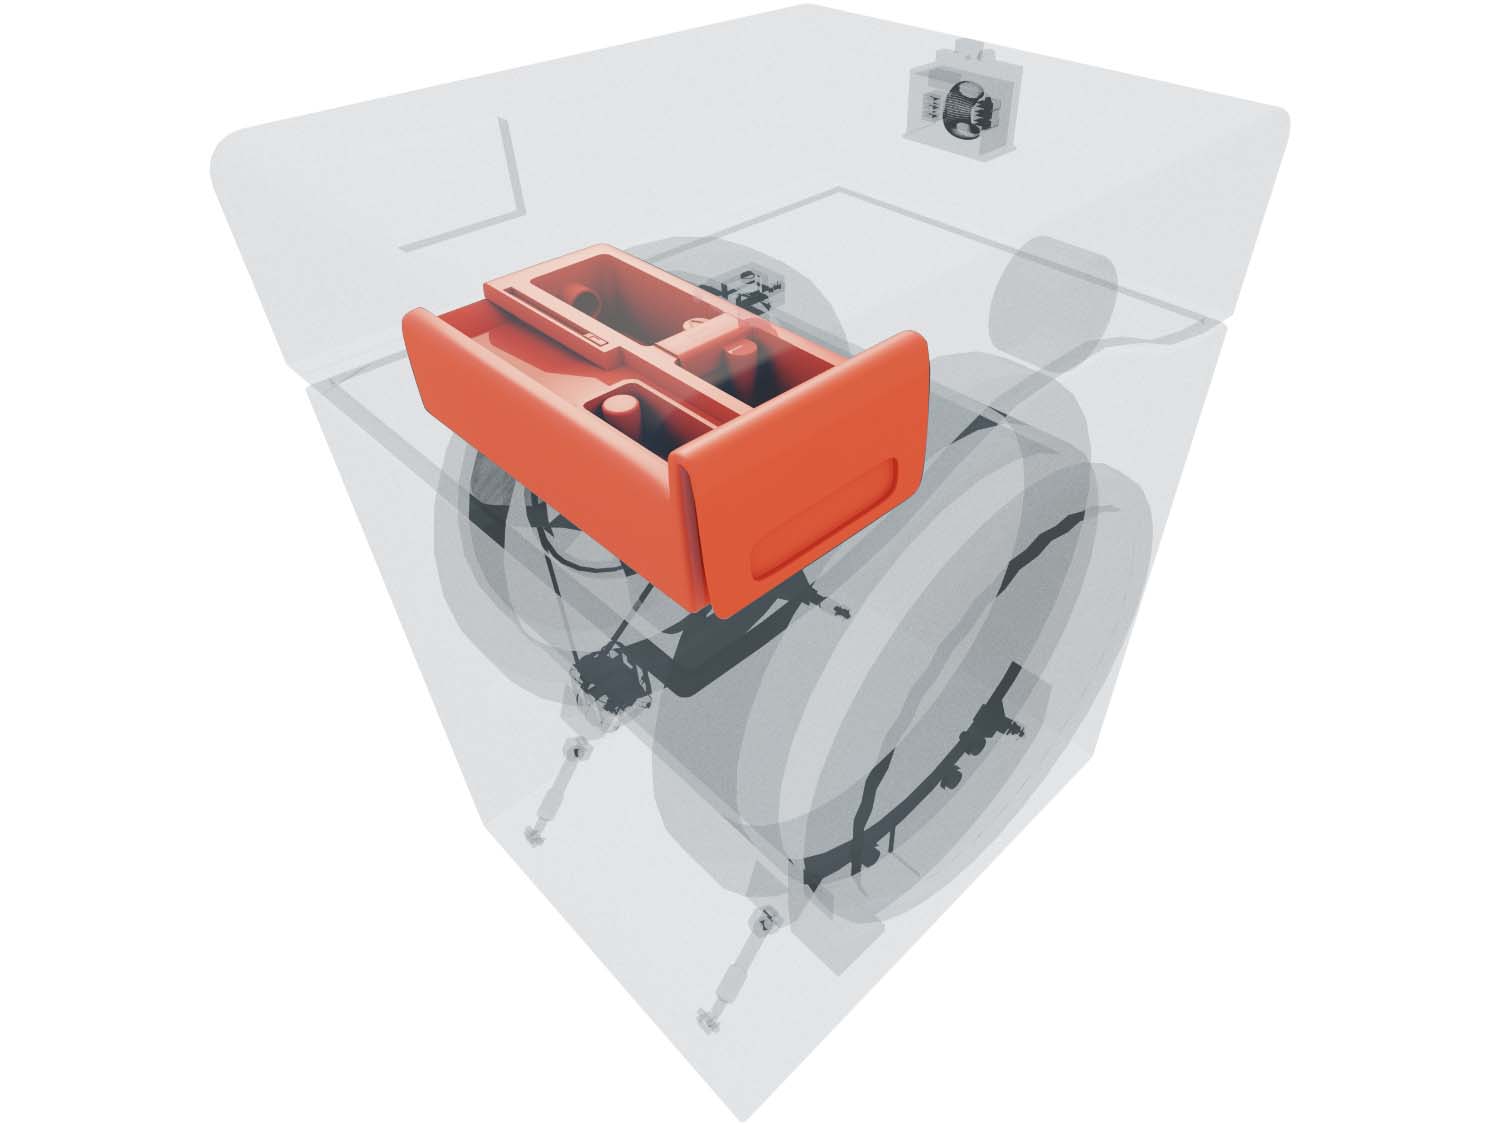 A 3D diagram showing the components of a washer and specifying the location of the detergent dispenser